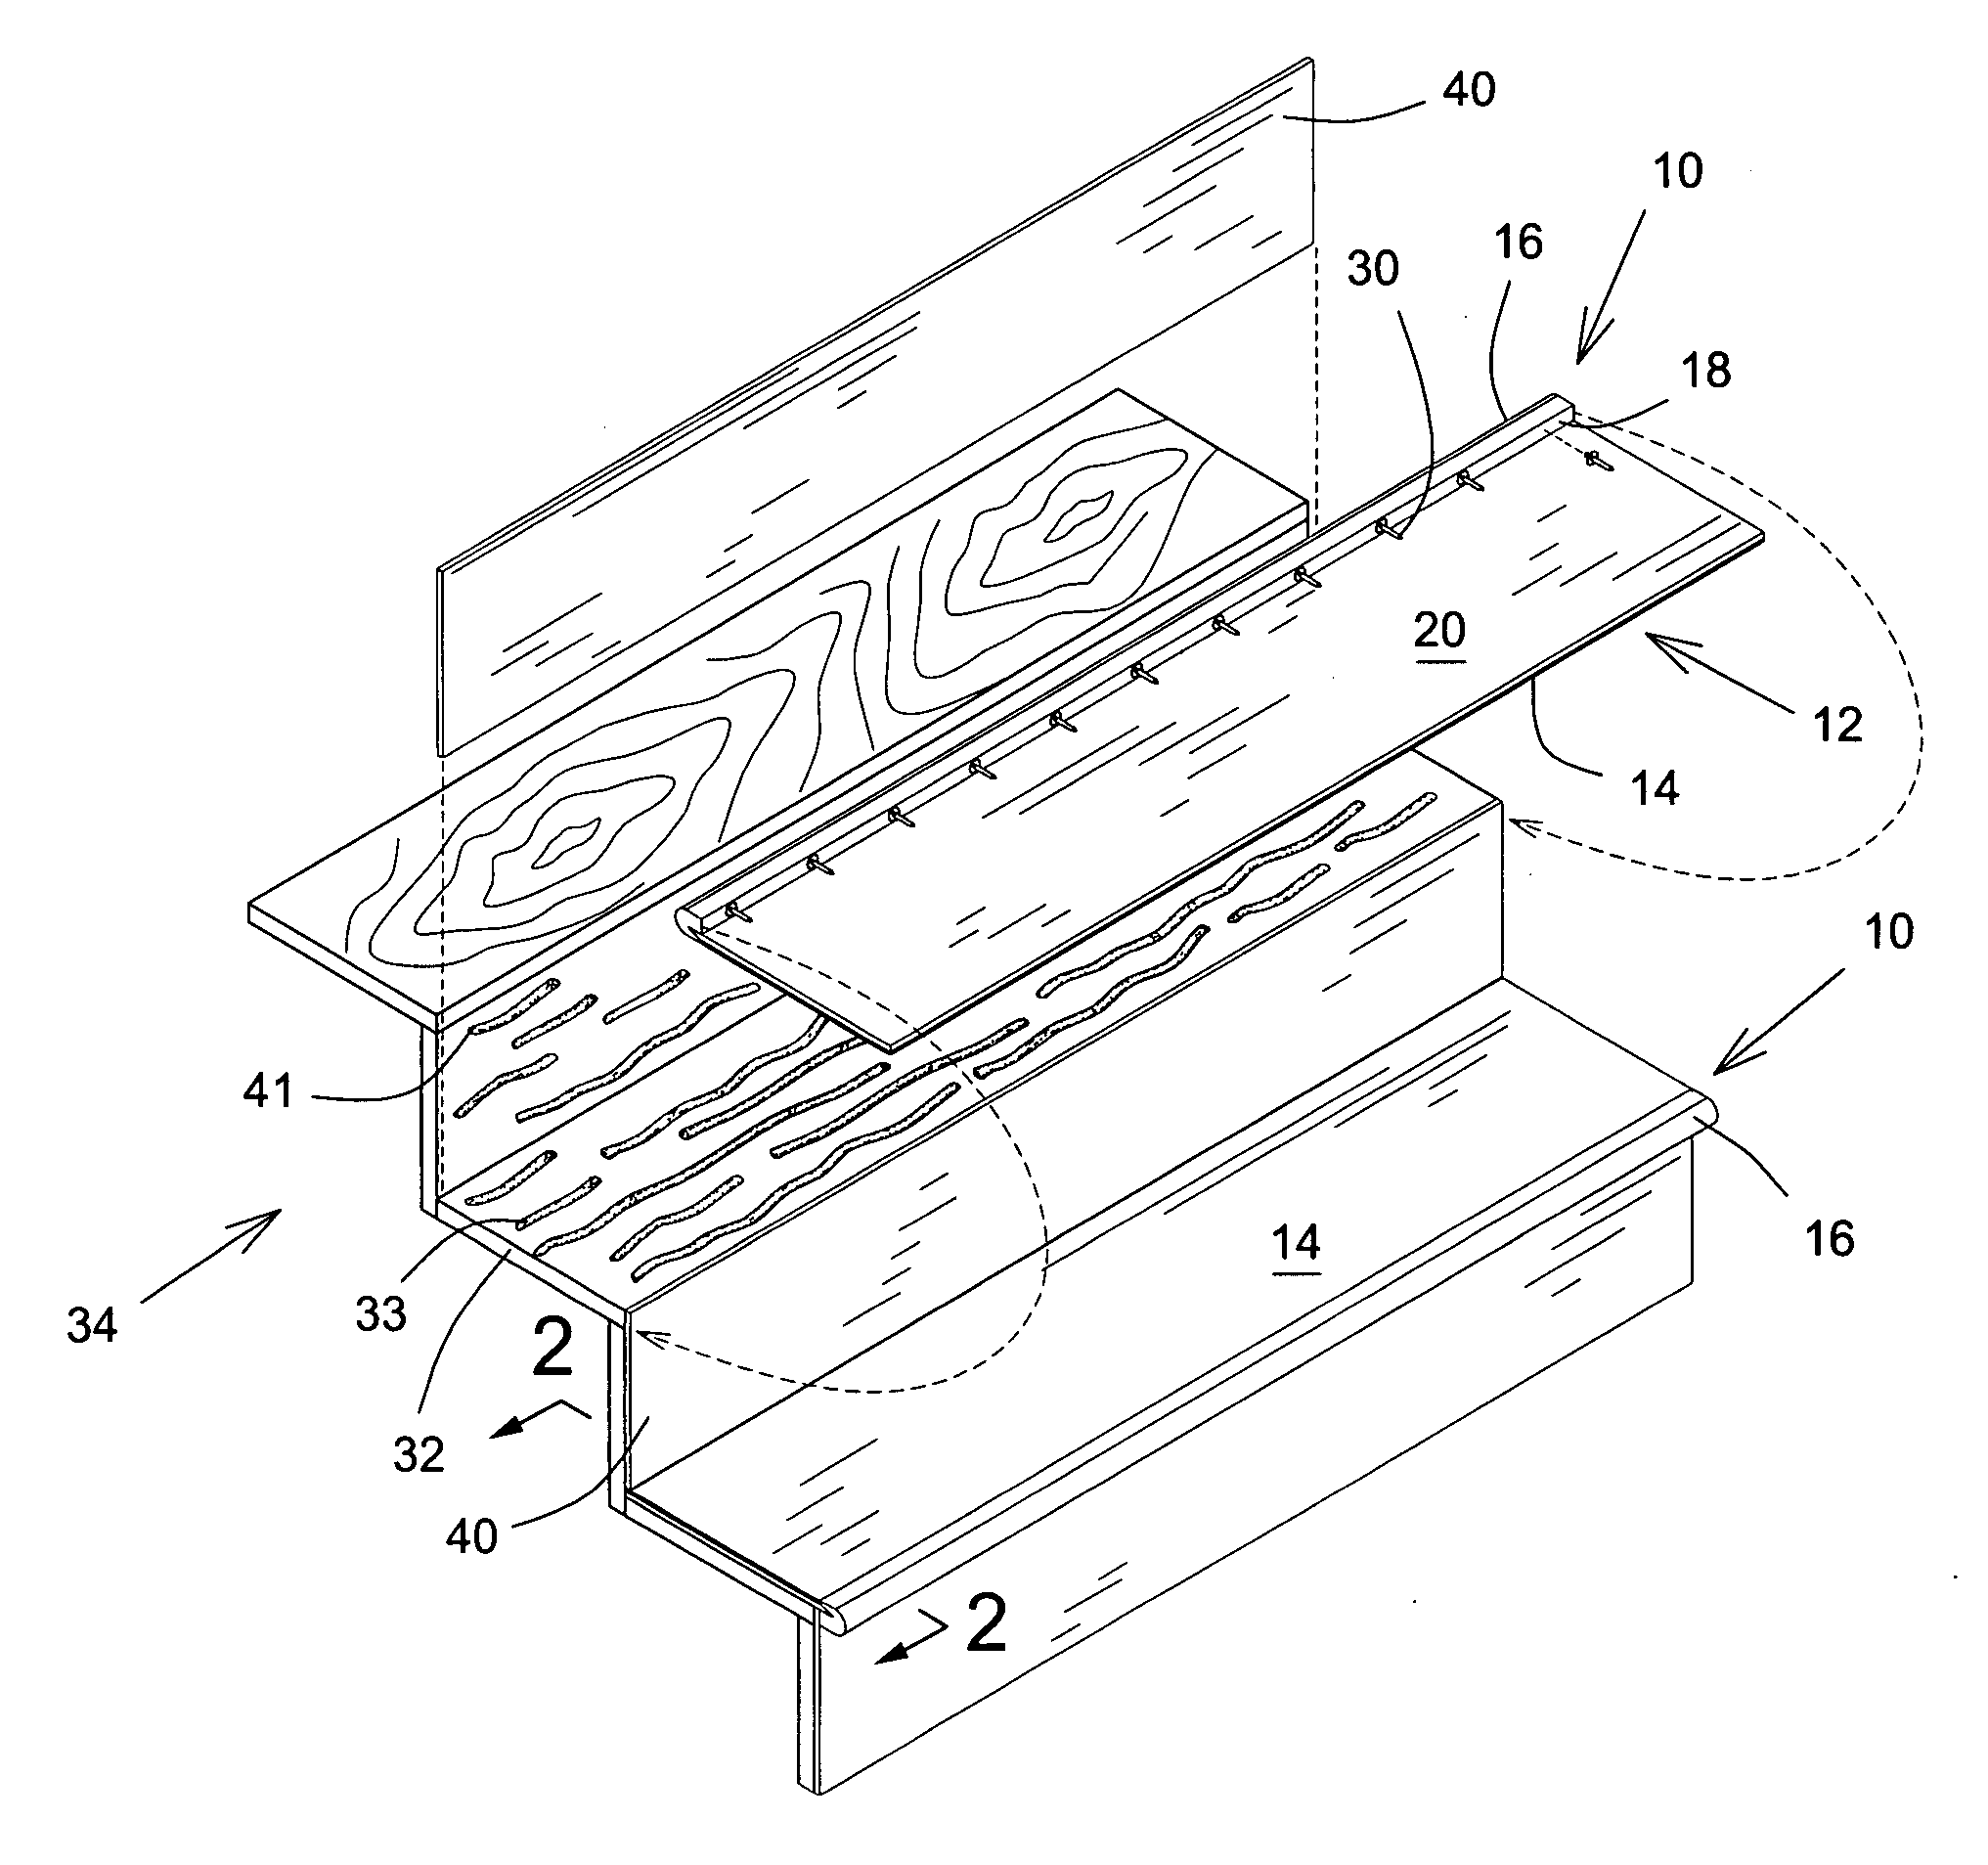 Staircase finishing plate arrangement